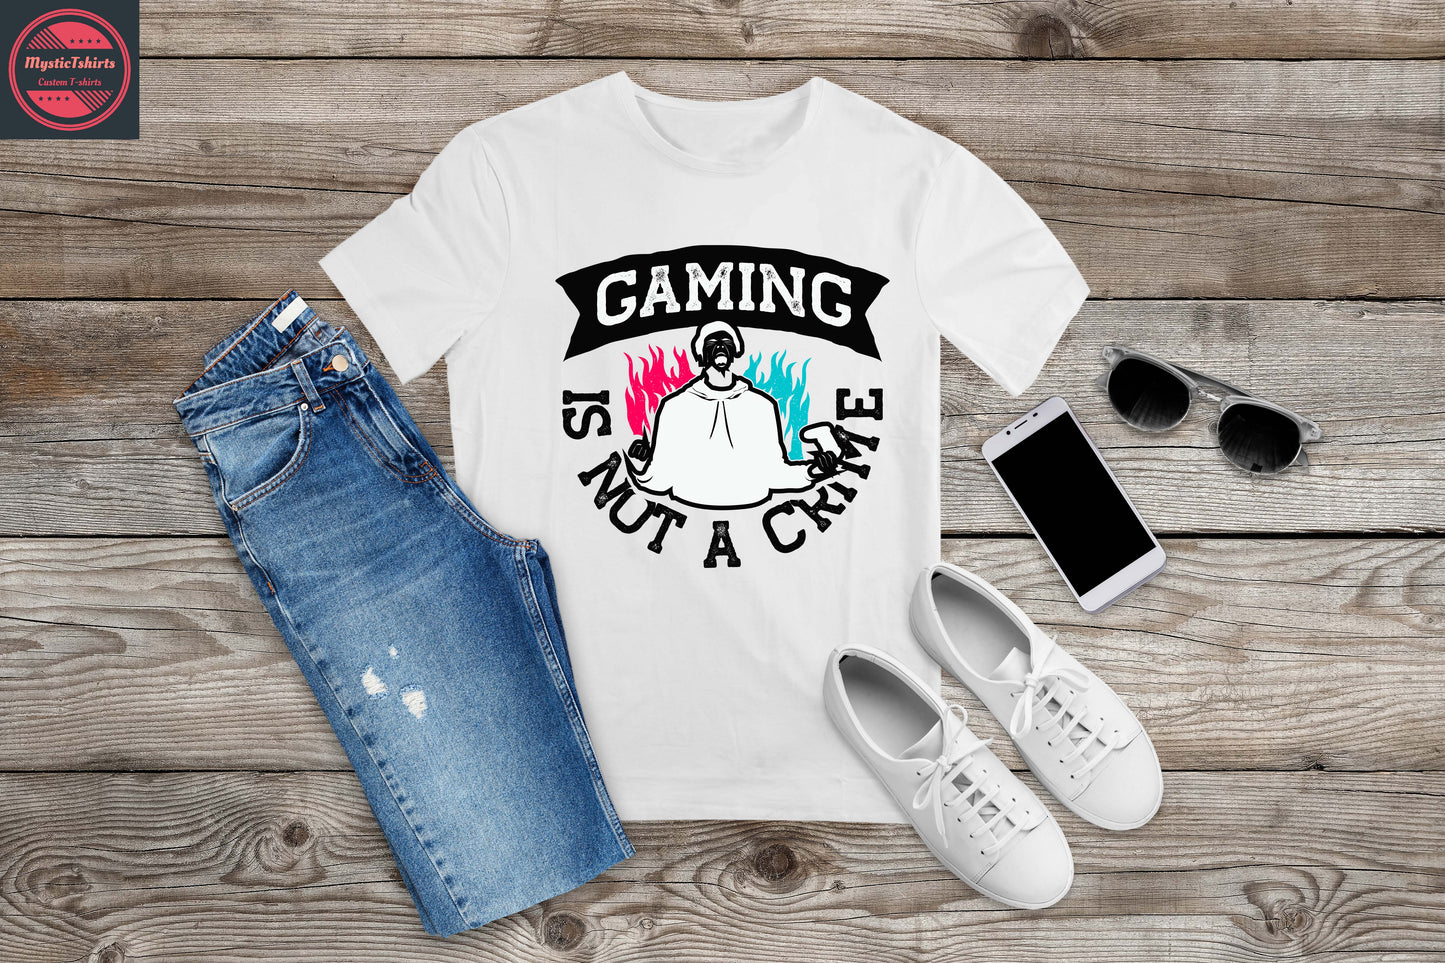 173. GAMING IS NUT A CRIME, Custom Made Shirt, Personalized T-Shirt, Custom Text, Make Your Own Shirt, Custom Tee